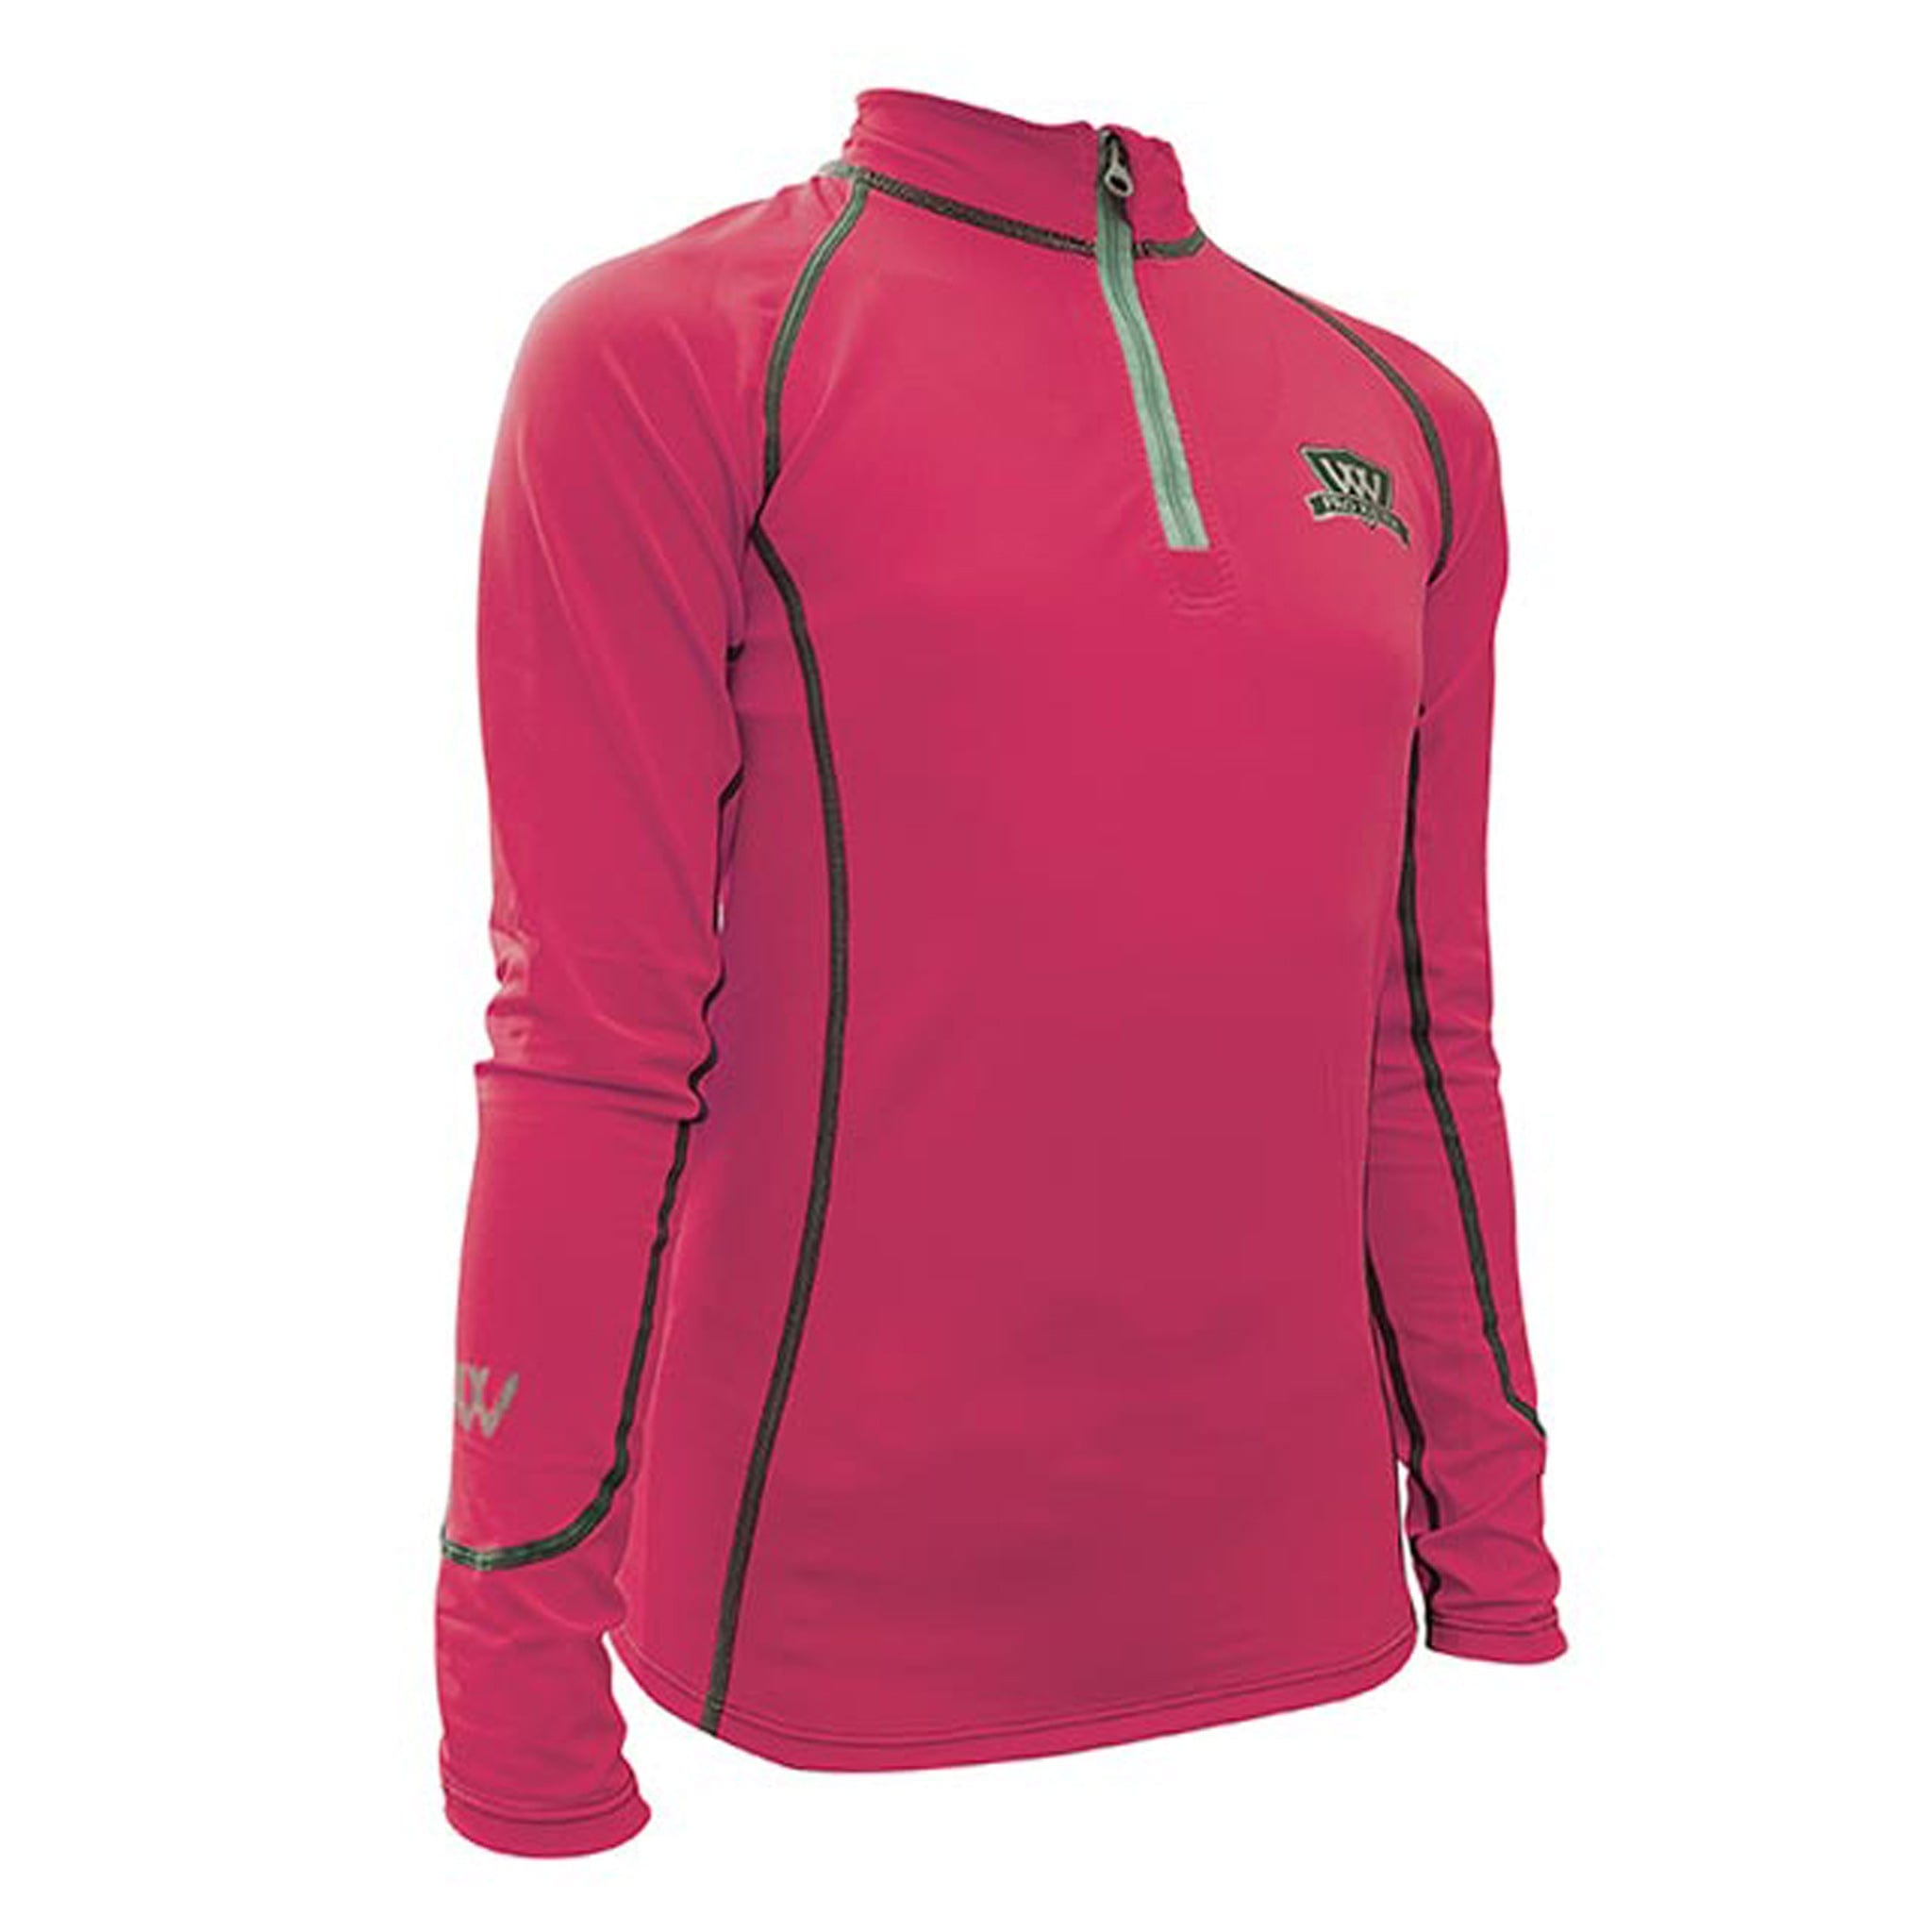 Woof Wear Children's Young Rider Pro Base Layer WA0005 Berry Pink Front